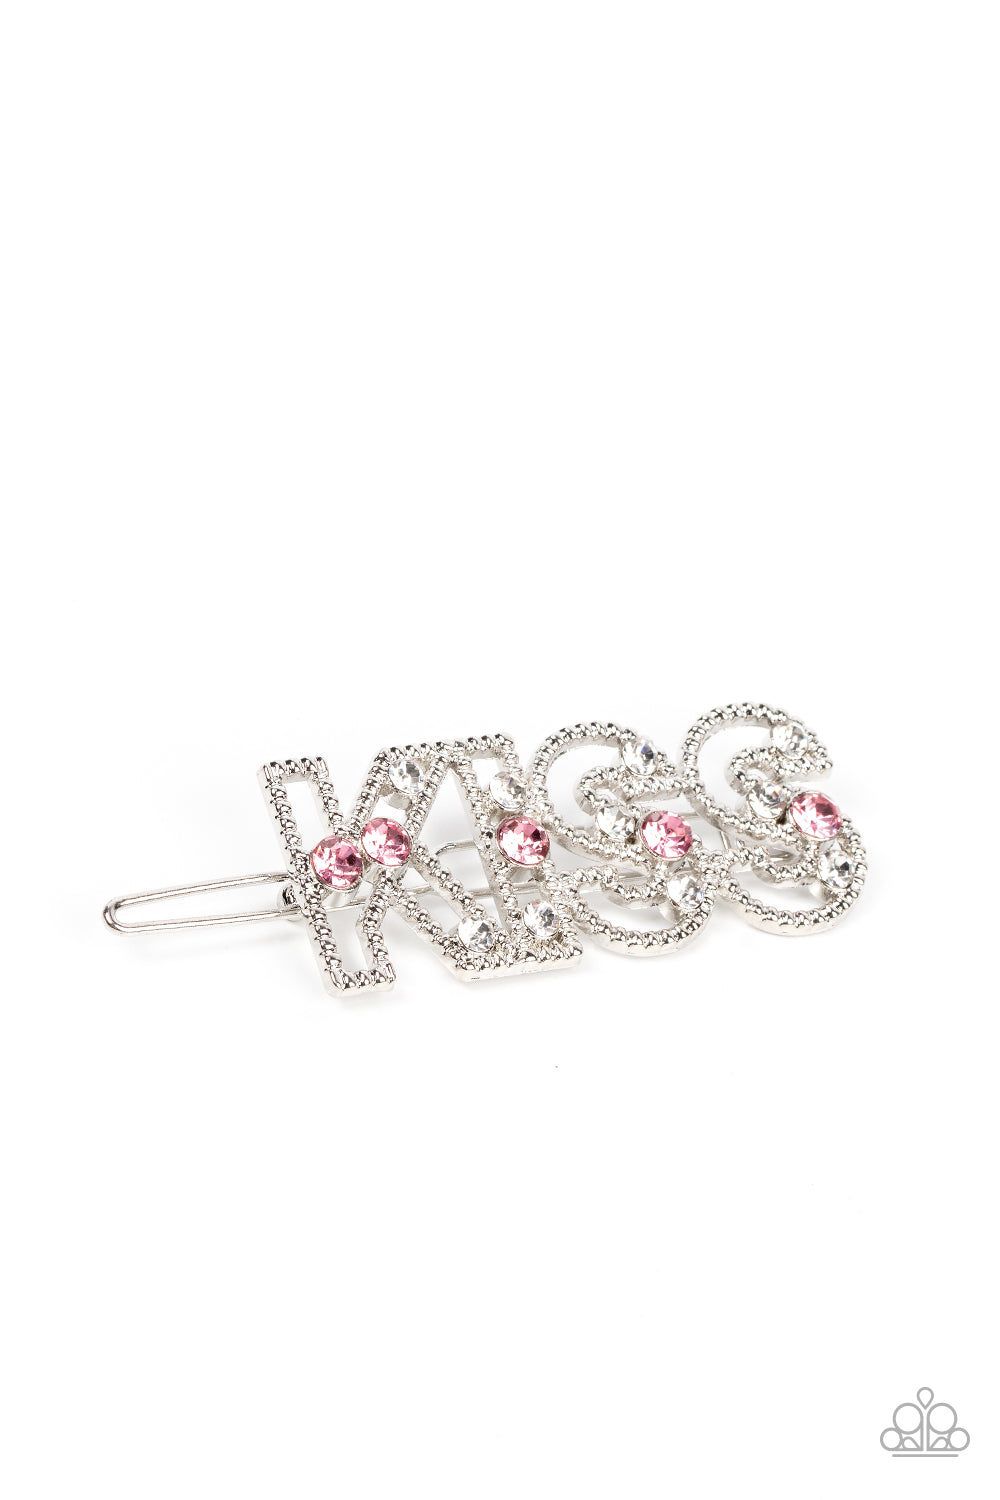 Paparazzi Accessories - Kiss Bliss #HB50- Pink Hair Accessories